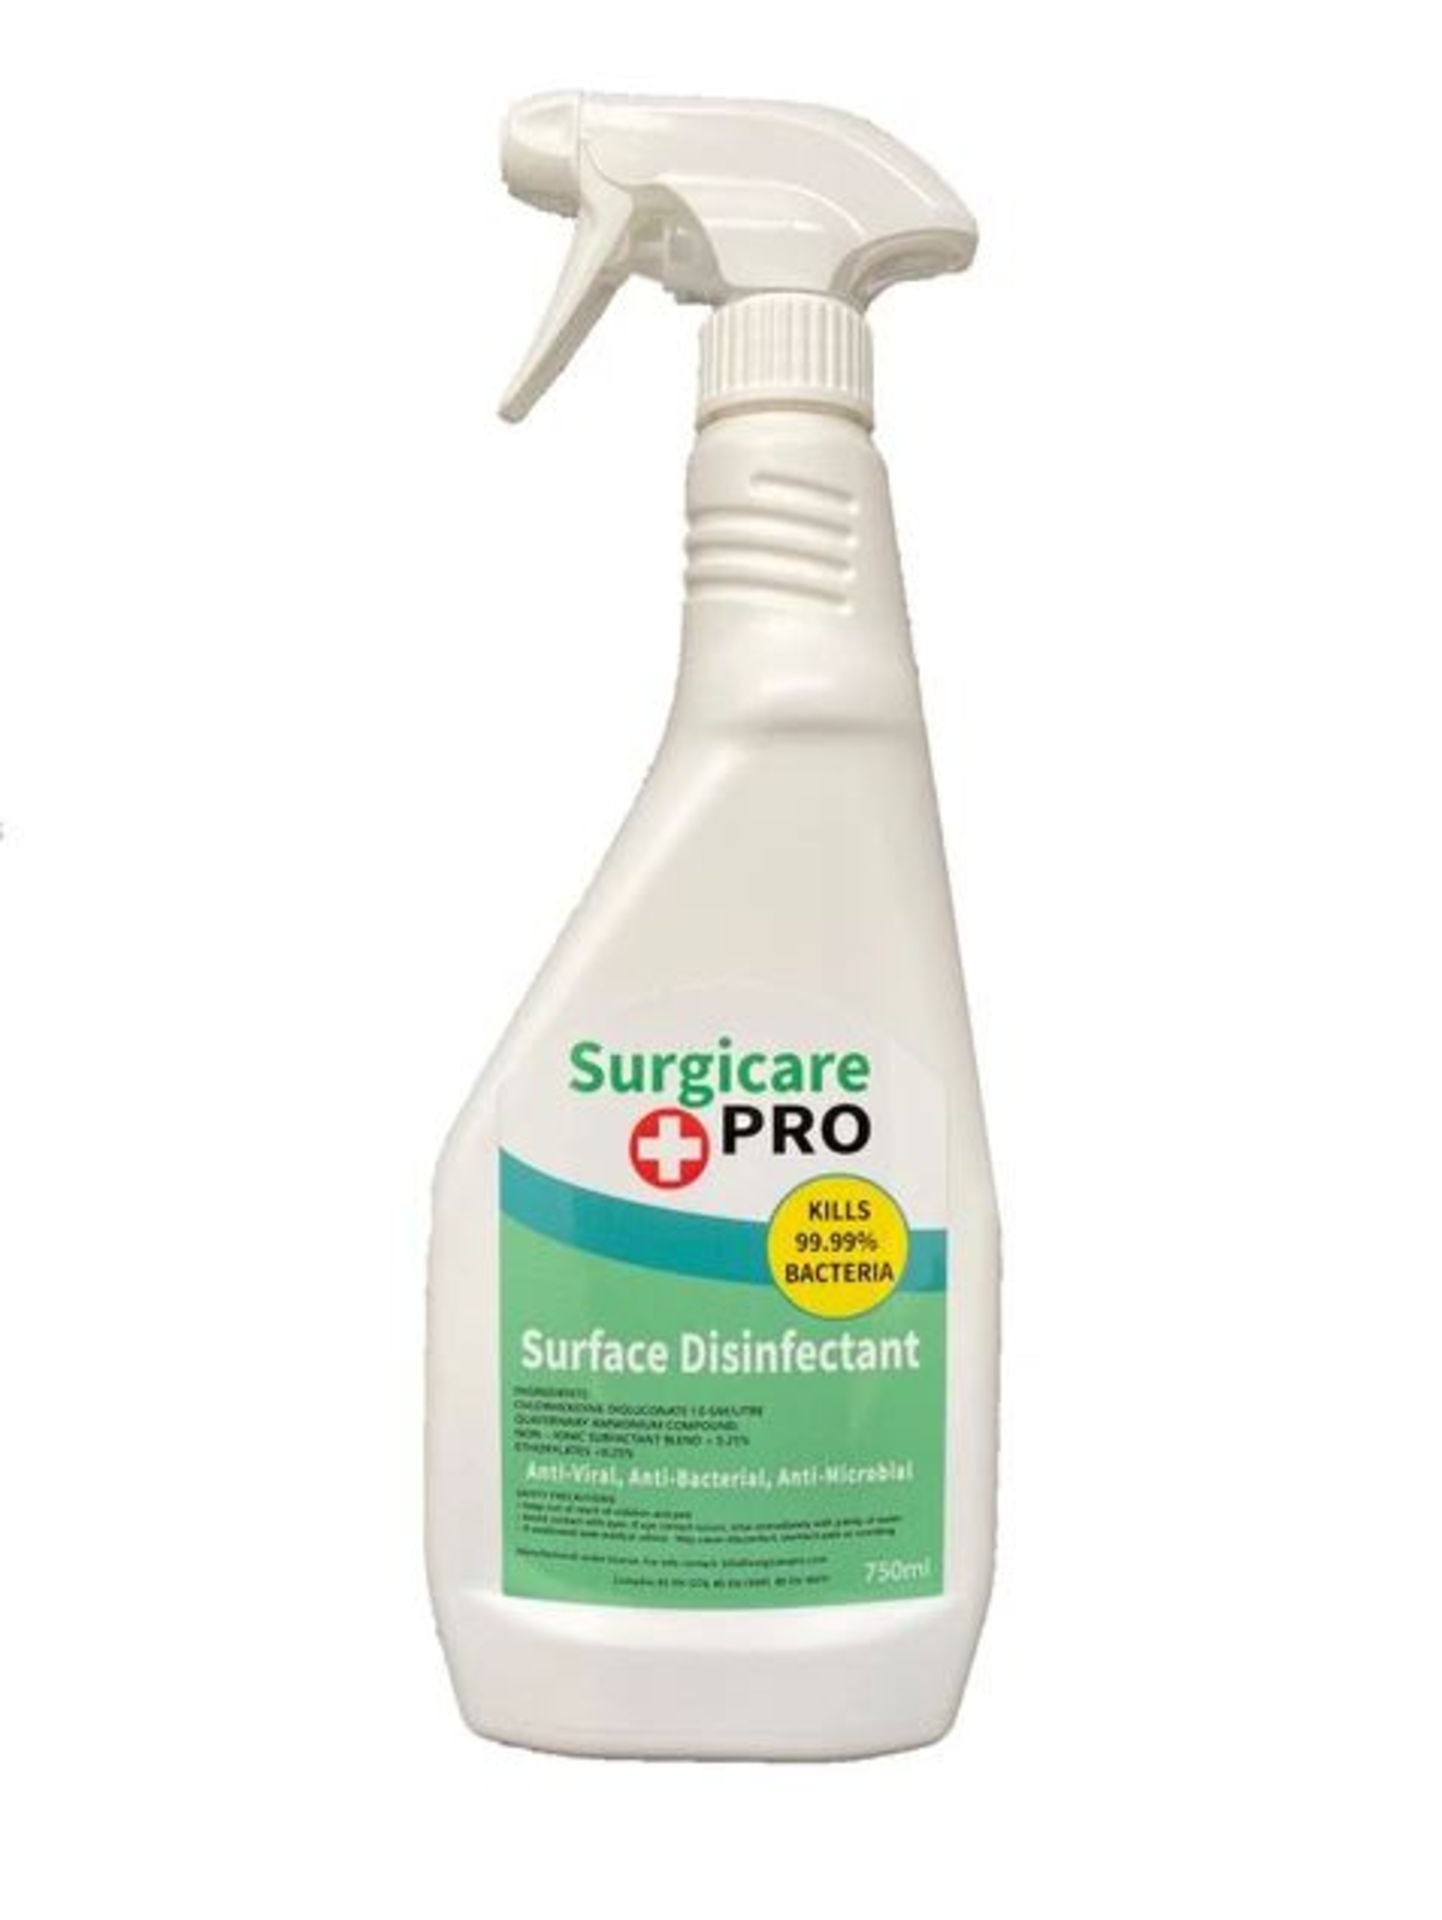 60 boxes. Each Box Contains 10 Surgicare Pro Surface Disinfectant Spray